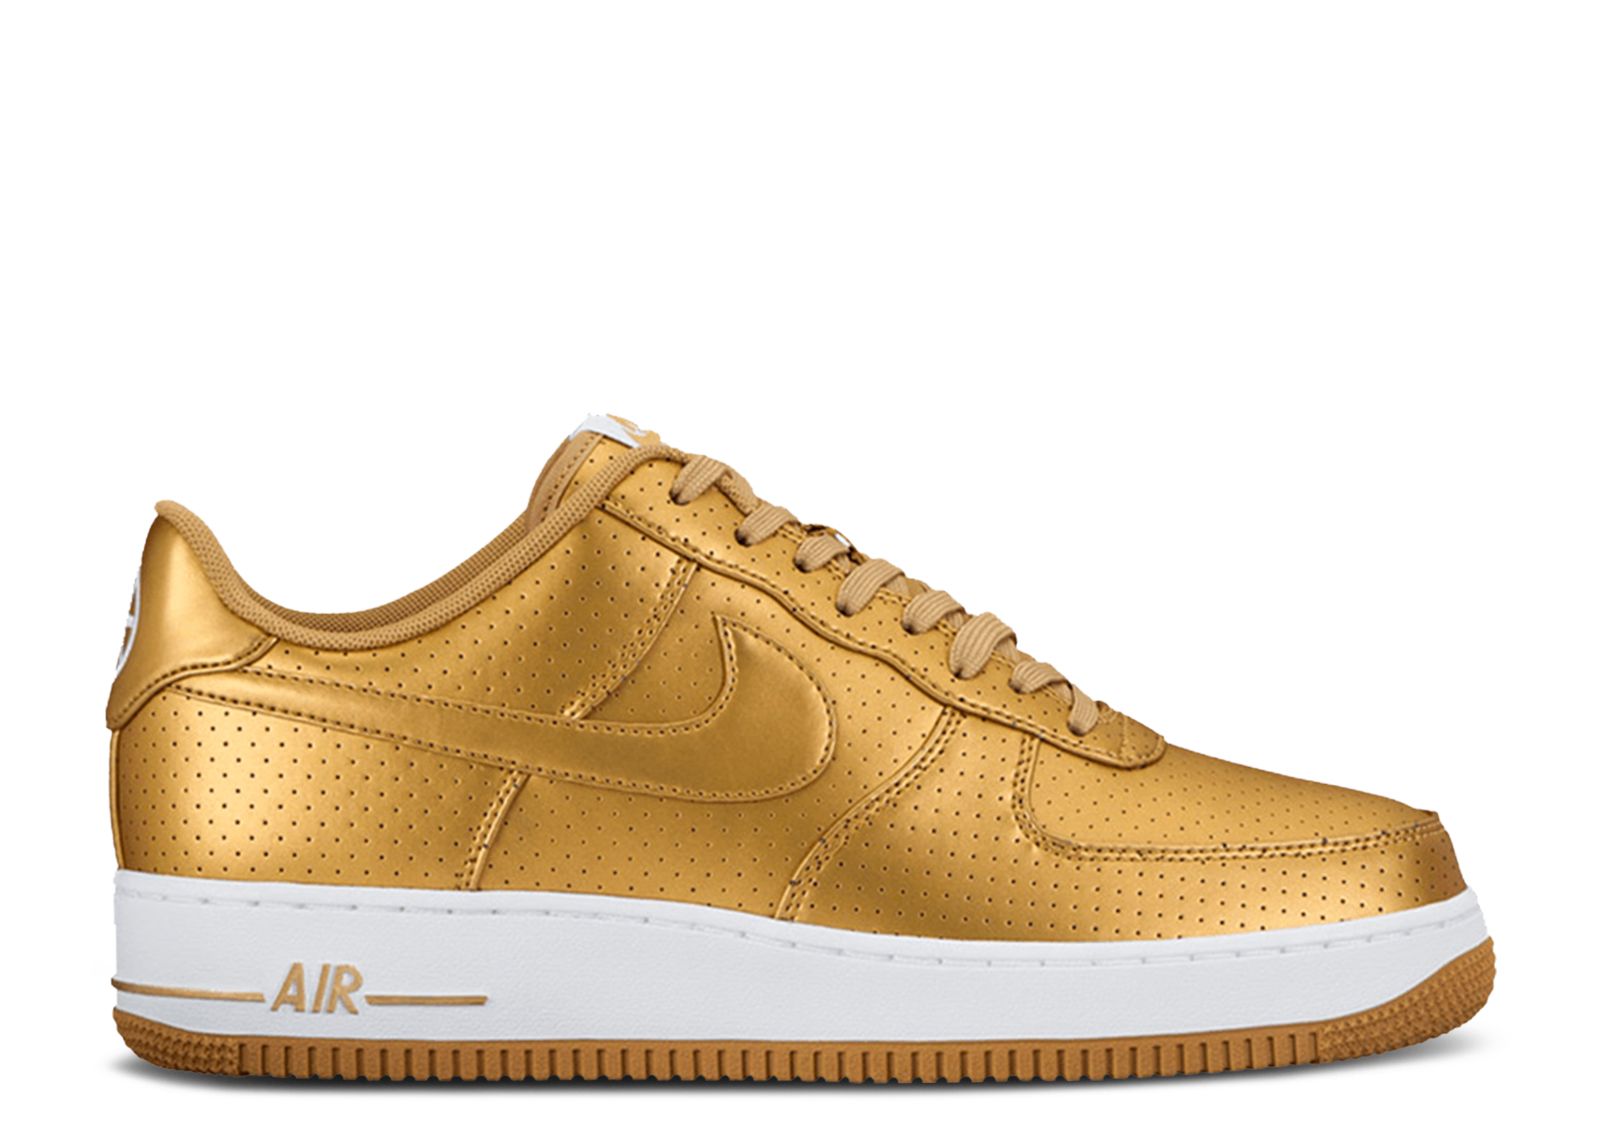 Air Force 1 Low '07 LV8 'Gold' - Nike - 718152 700 - gold/gold